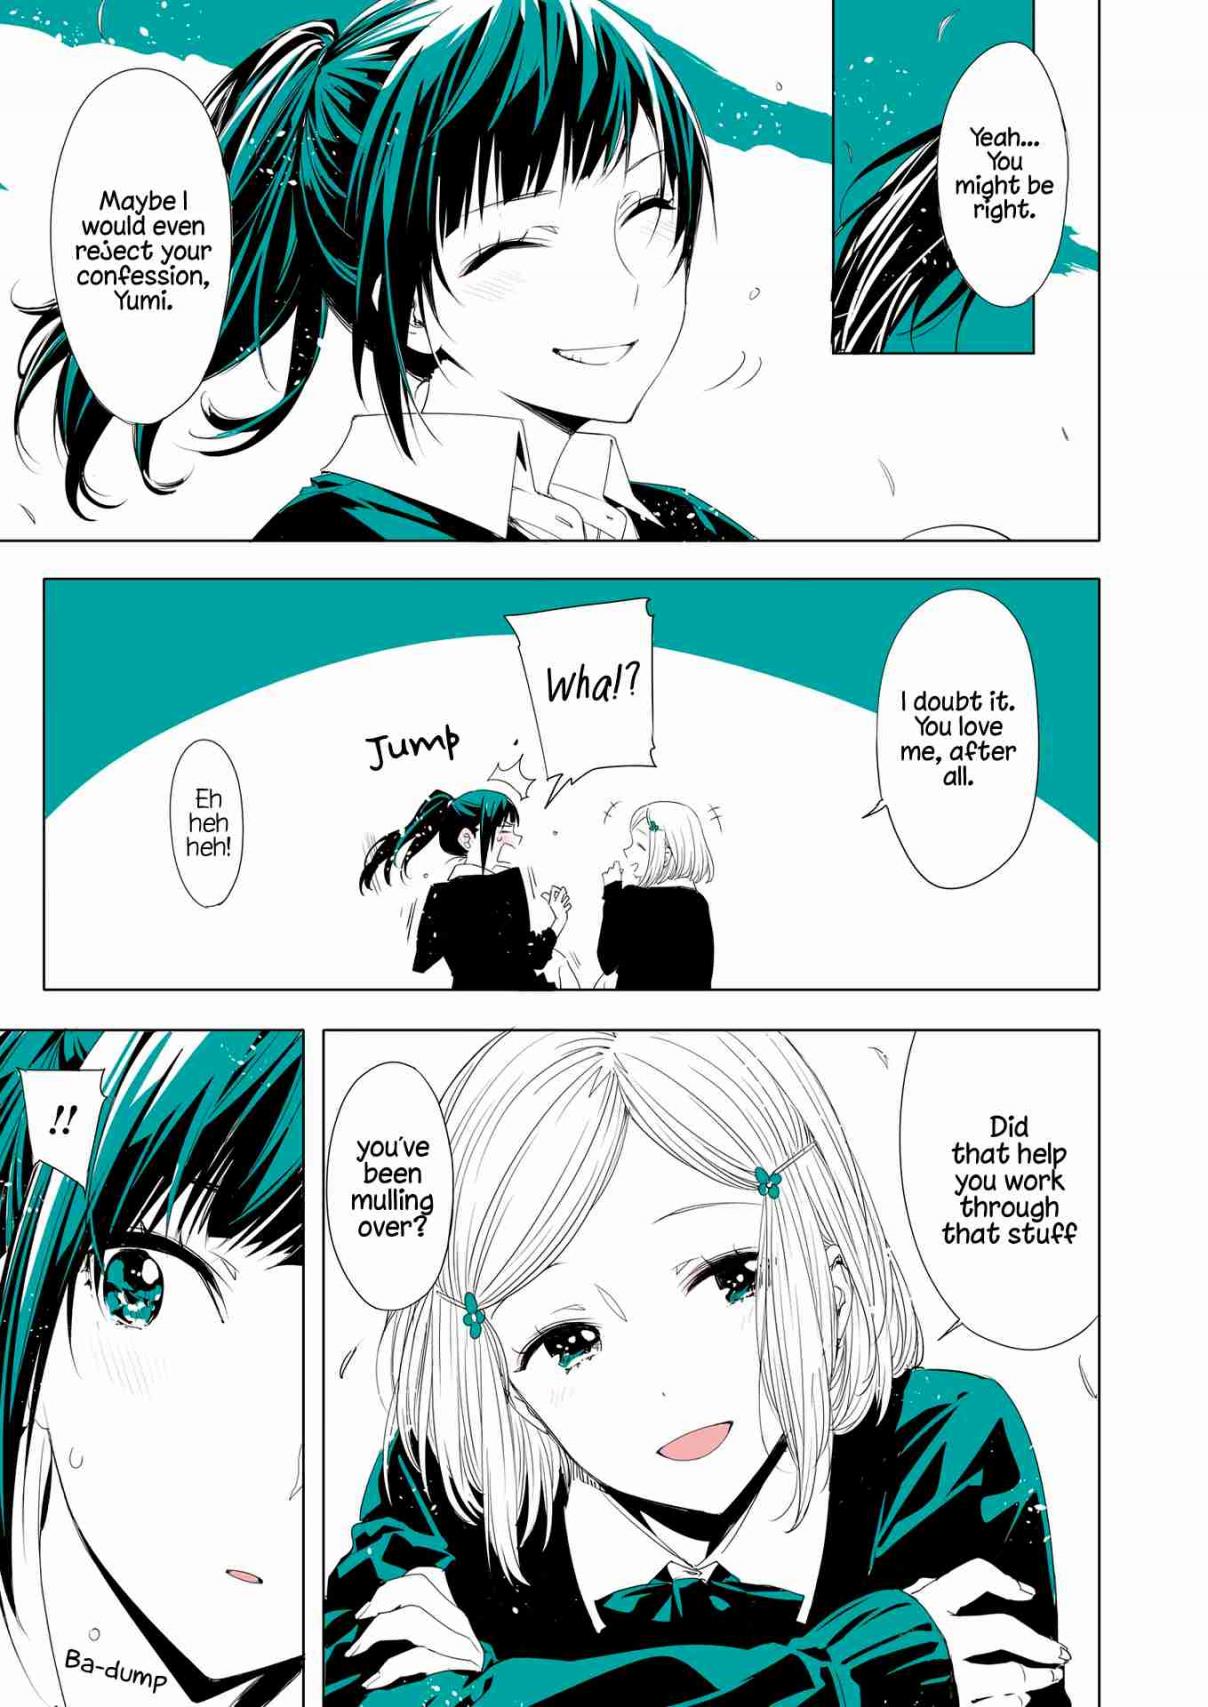 Lilium Terrarium Vol. 1 Ch. 4 Even If You Don't Know How to Answer Right Away...